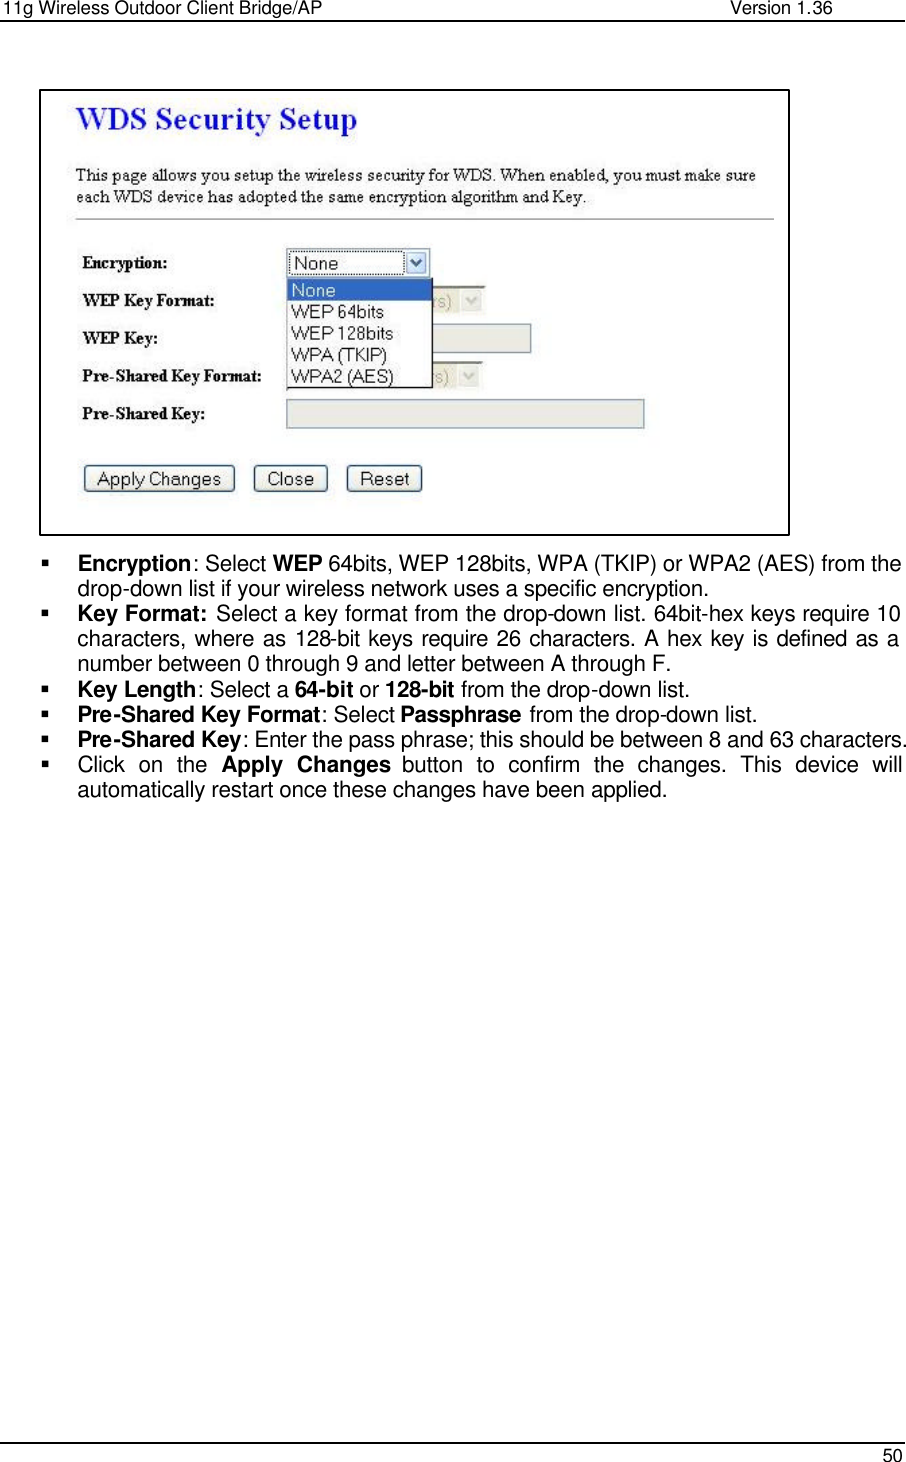 11g Wireless Outdoor Client Bridge/AP                Version 1.36    50                      § Encryption: Select WEP 64bits, WEP 128bits, WPA (TKIP) or WPA2 (AES) from the drop-down list if your wireless network uses a specific encryption.  § Key Format: Select a key format from the drop-down list. 64bit-hex keys require 10 characters, where as 128-bit keys require 26 characters. A hex key is defined as a number between 0 through 9 and letter between A through F. § Key Length: Select a 64-bit or 128-bit from the drop-down list.  § Pre-Shared Key Format: Select Passphrase from the drop-down list.  § Pre-Shared Key: Enter the pass phrase; this should be between 8 and 63 characters.  § Click on the Apply Changes button to confirm the changes. This device will automatically restart once these changes have been applied.      